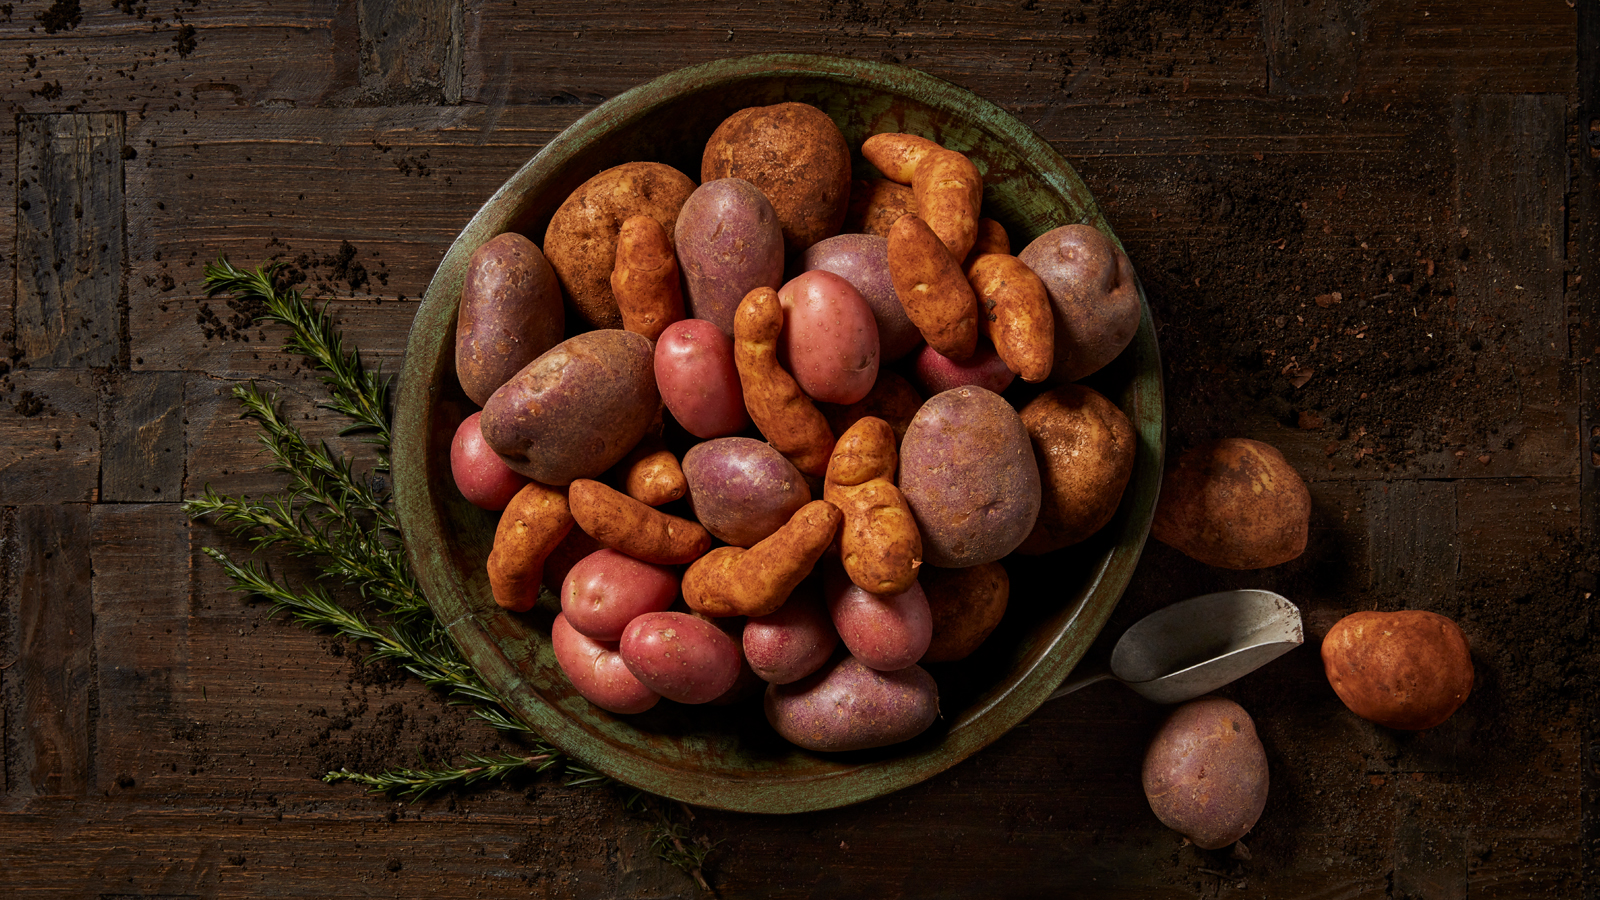 Red Potatoes Vs. White: What's The Difference?